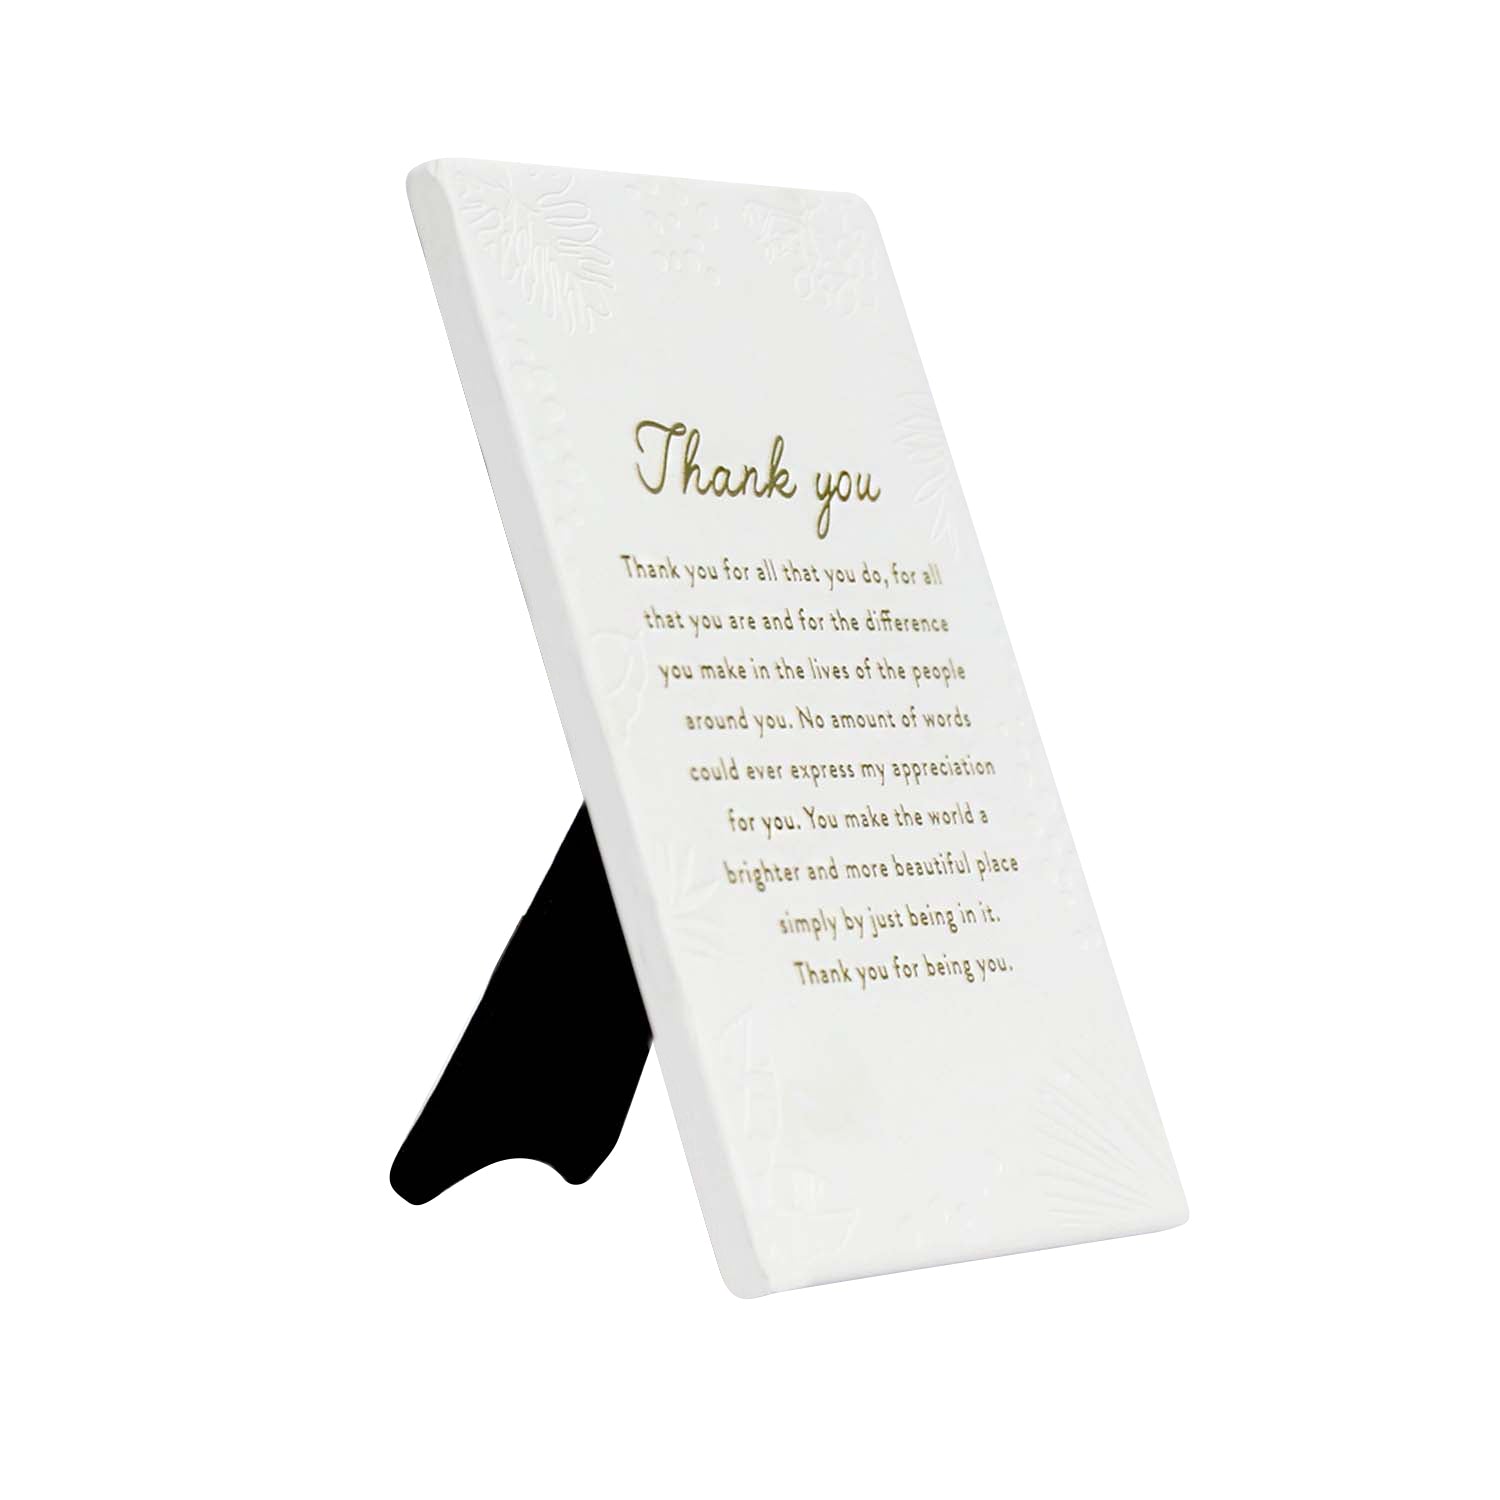 Inspired by their previous best-selling Life Quotes range, Precious Quotes include 12 different verses, with each Quote a meaningful gift idea for someone special. Conveying a custom themed message in a 3D embossed text upon delicate etched floral designs, each Precious Quote also comes with its own custom gift box that features exquisite gold foil detail and personalised “To” and “From” fields.